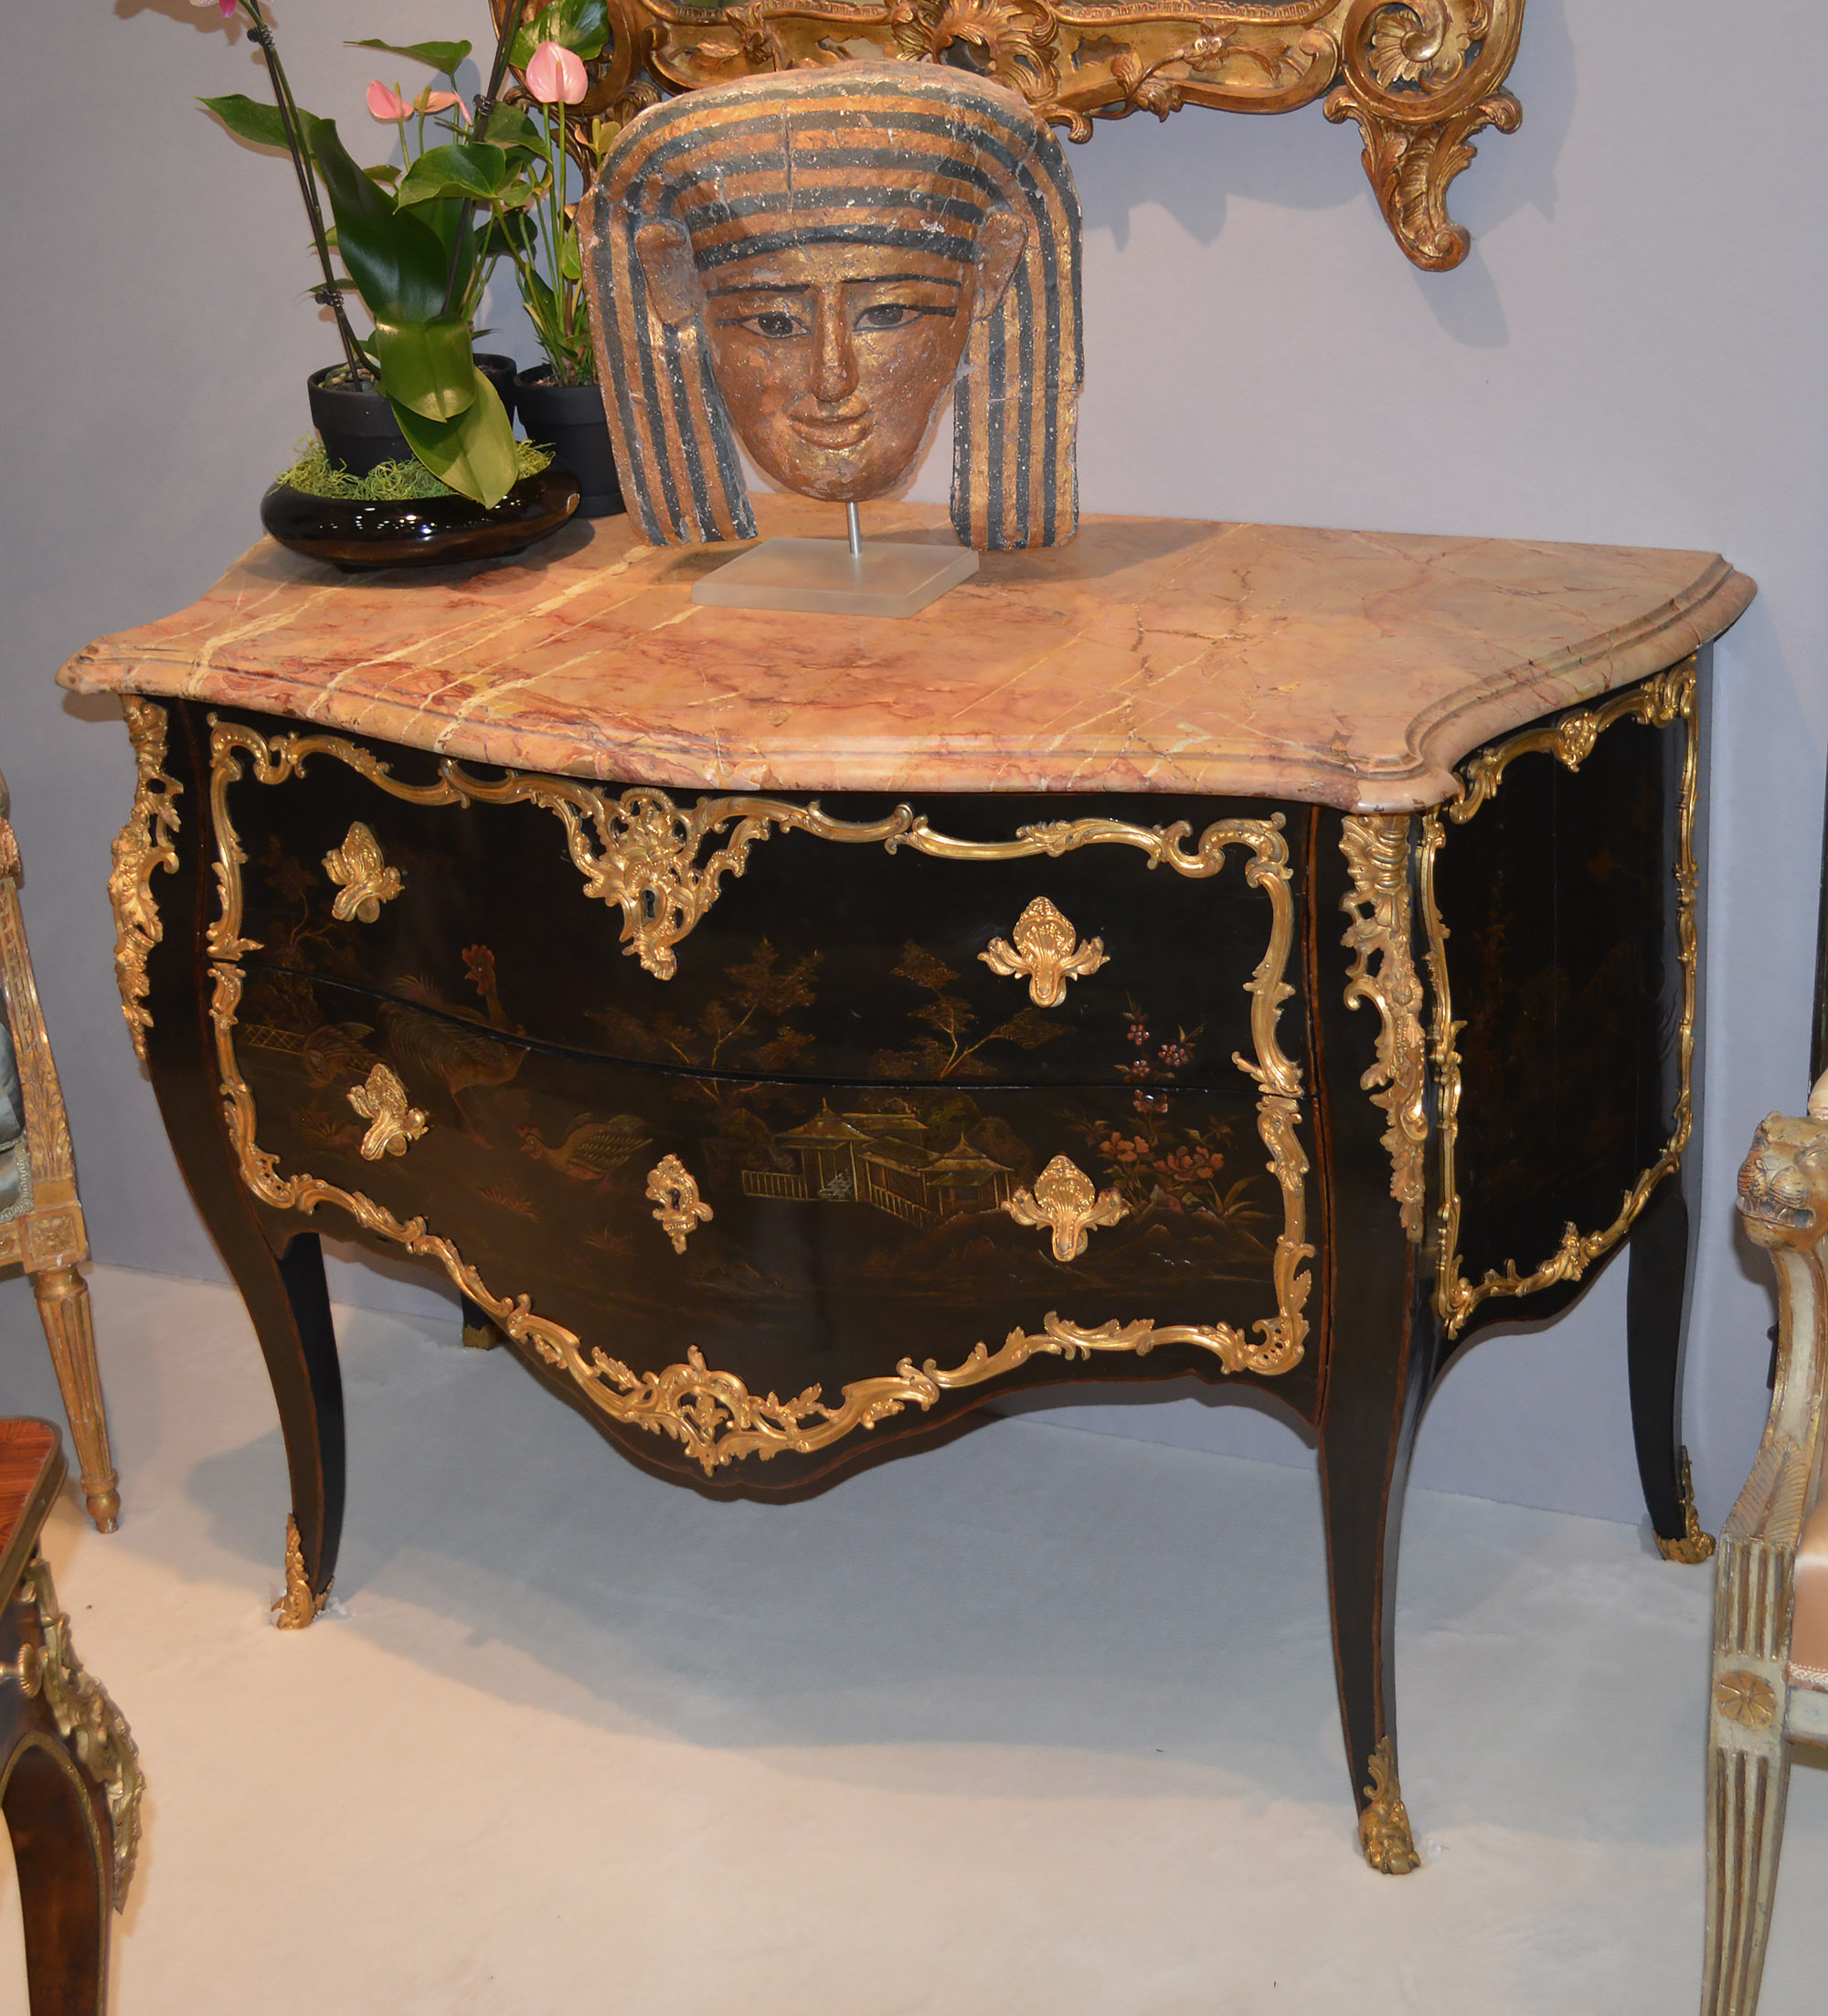 Very fine, French, Louis XV style chinoiserie commode